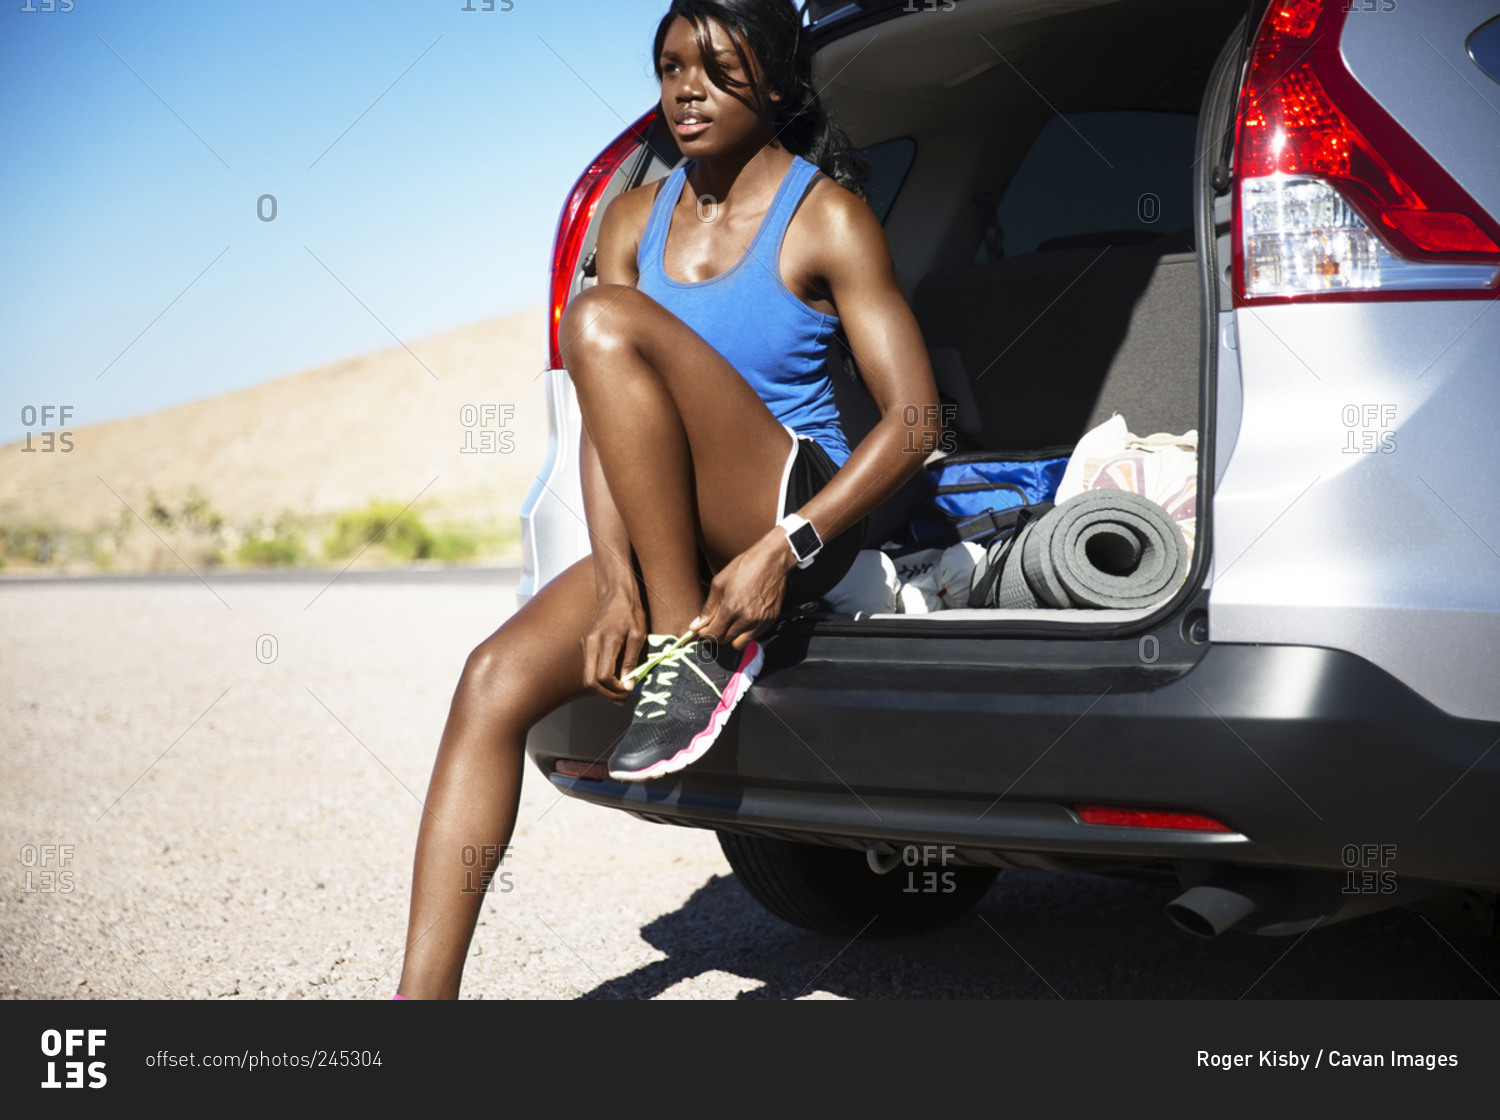 Woman sitting in van tying shoes for workout